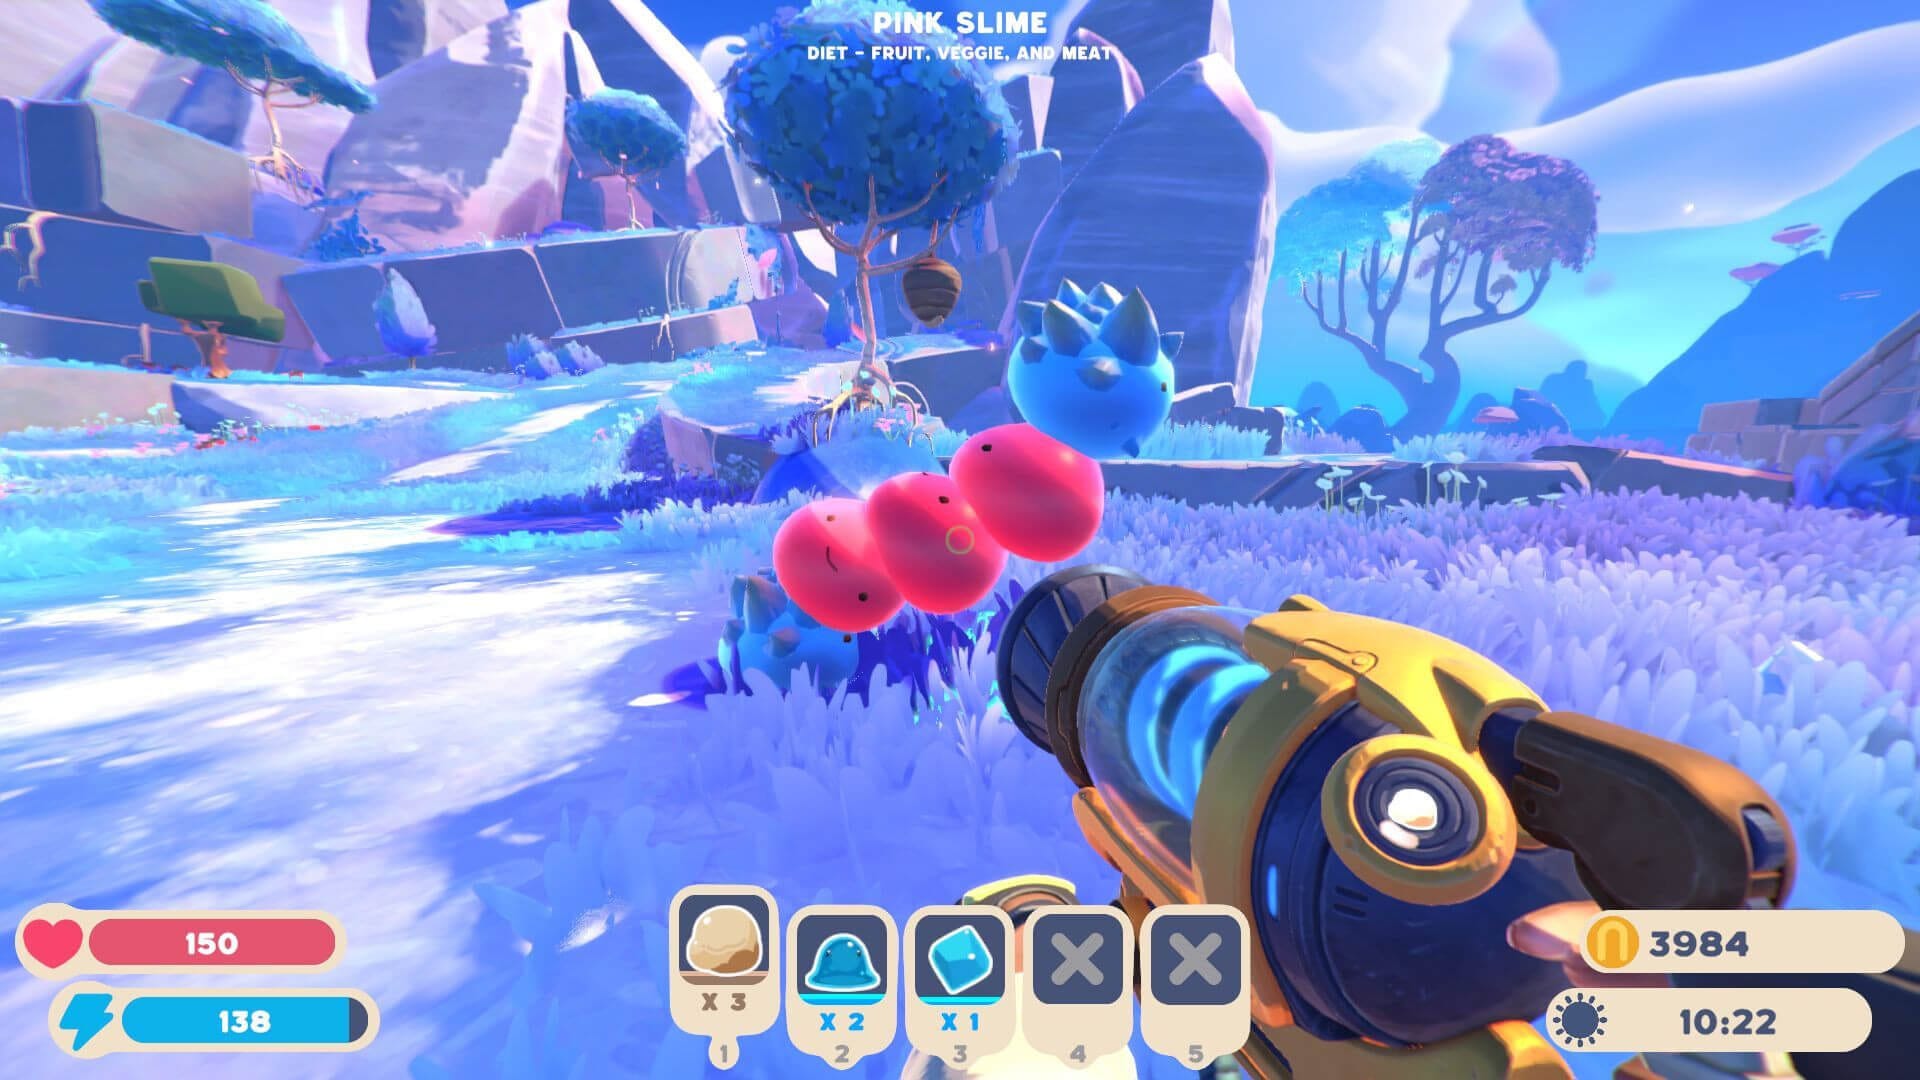 Slime Rancher 2 Sales Cross 300k In First Week With “Zero Crunch”